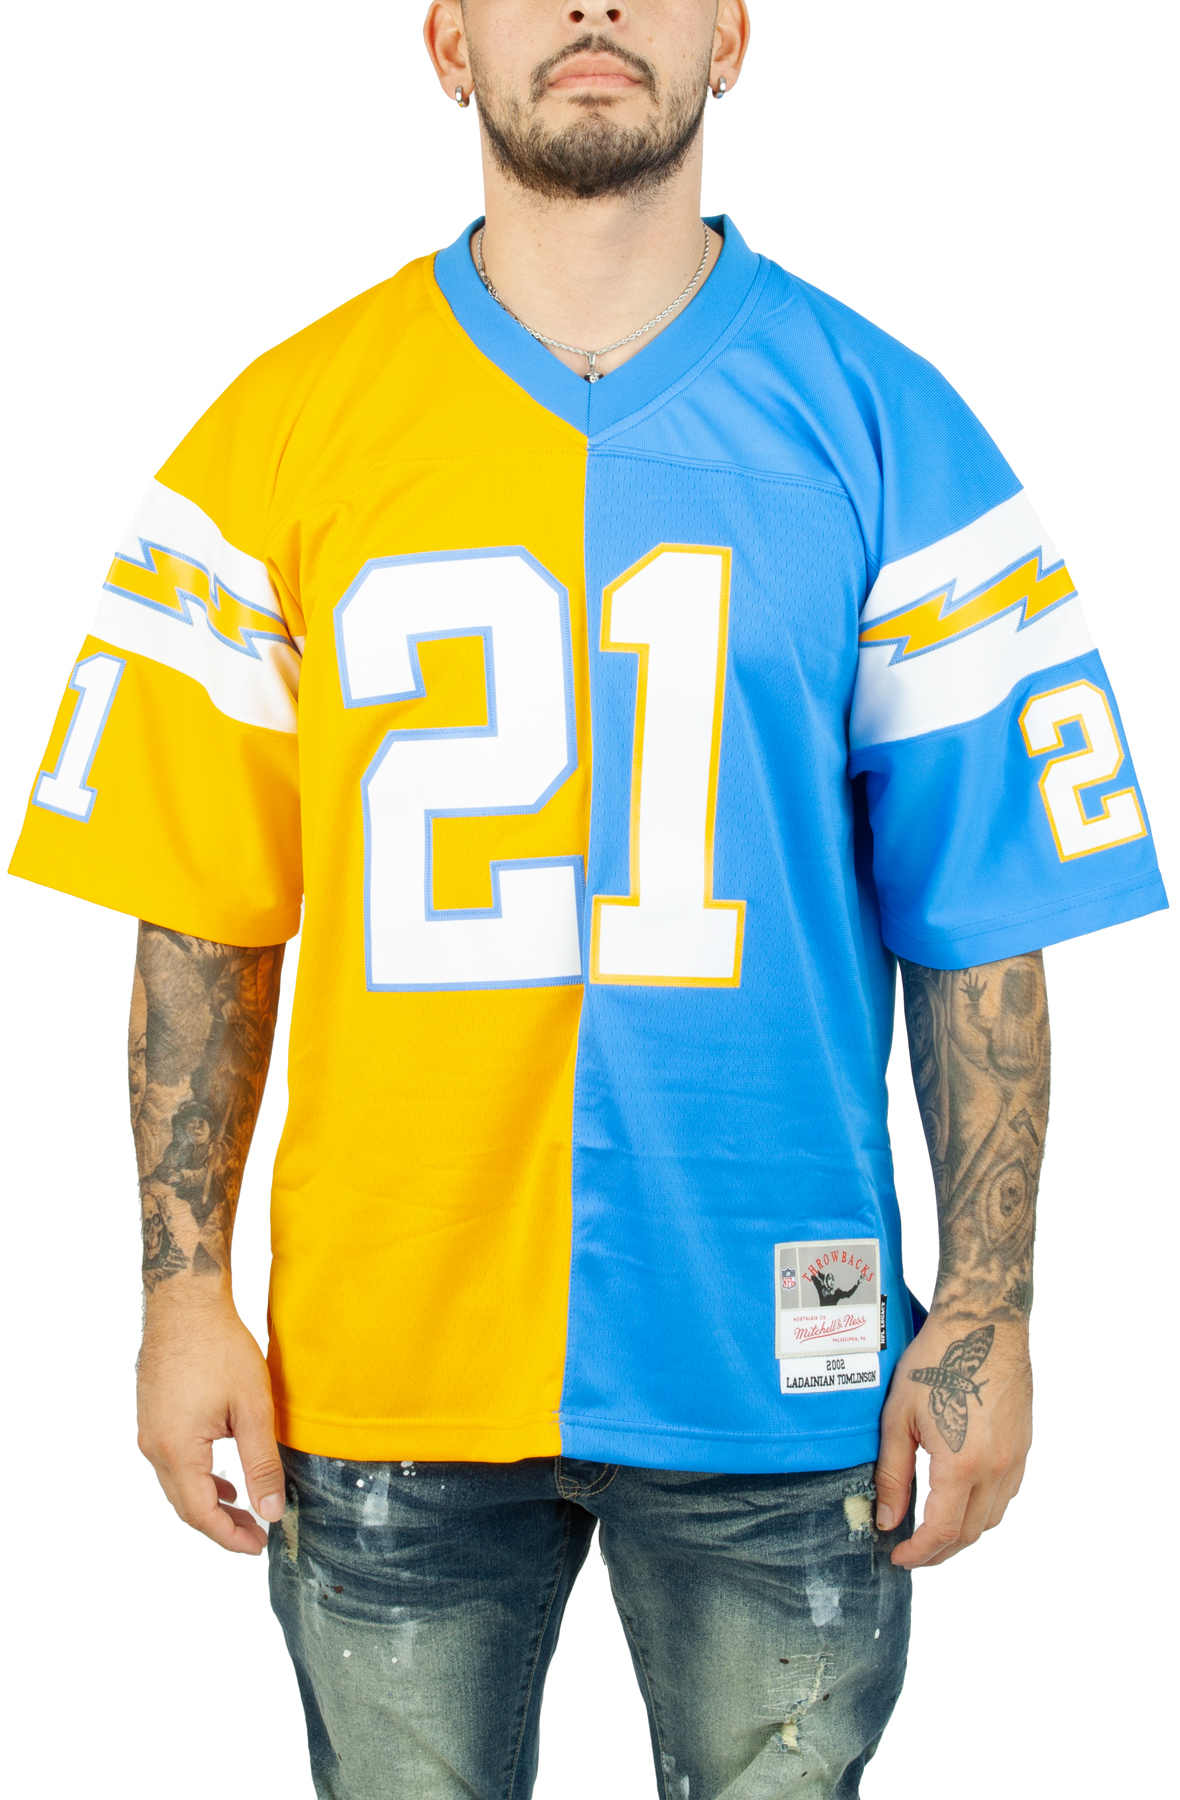 San Diego Chargers Ladainian Tomlinson #21 Home Jersey Kid's